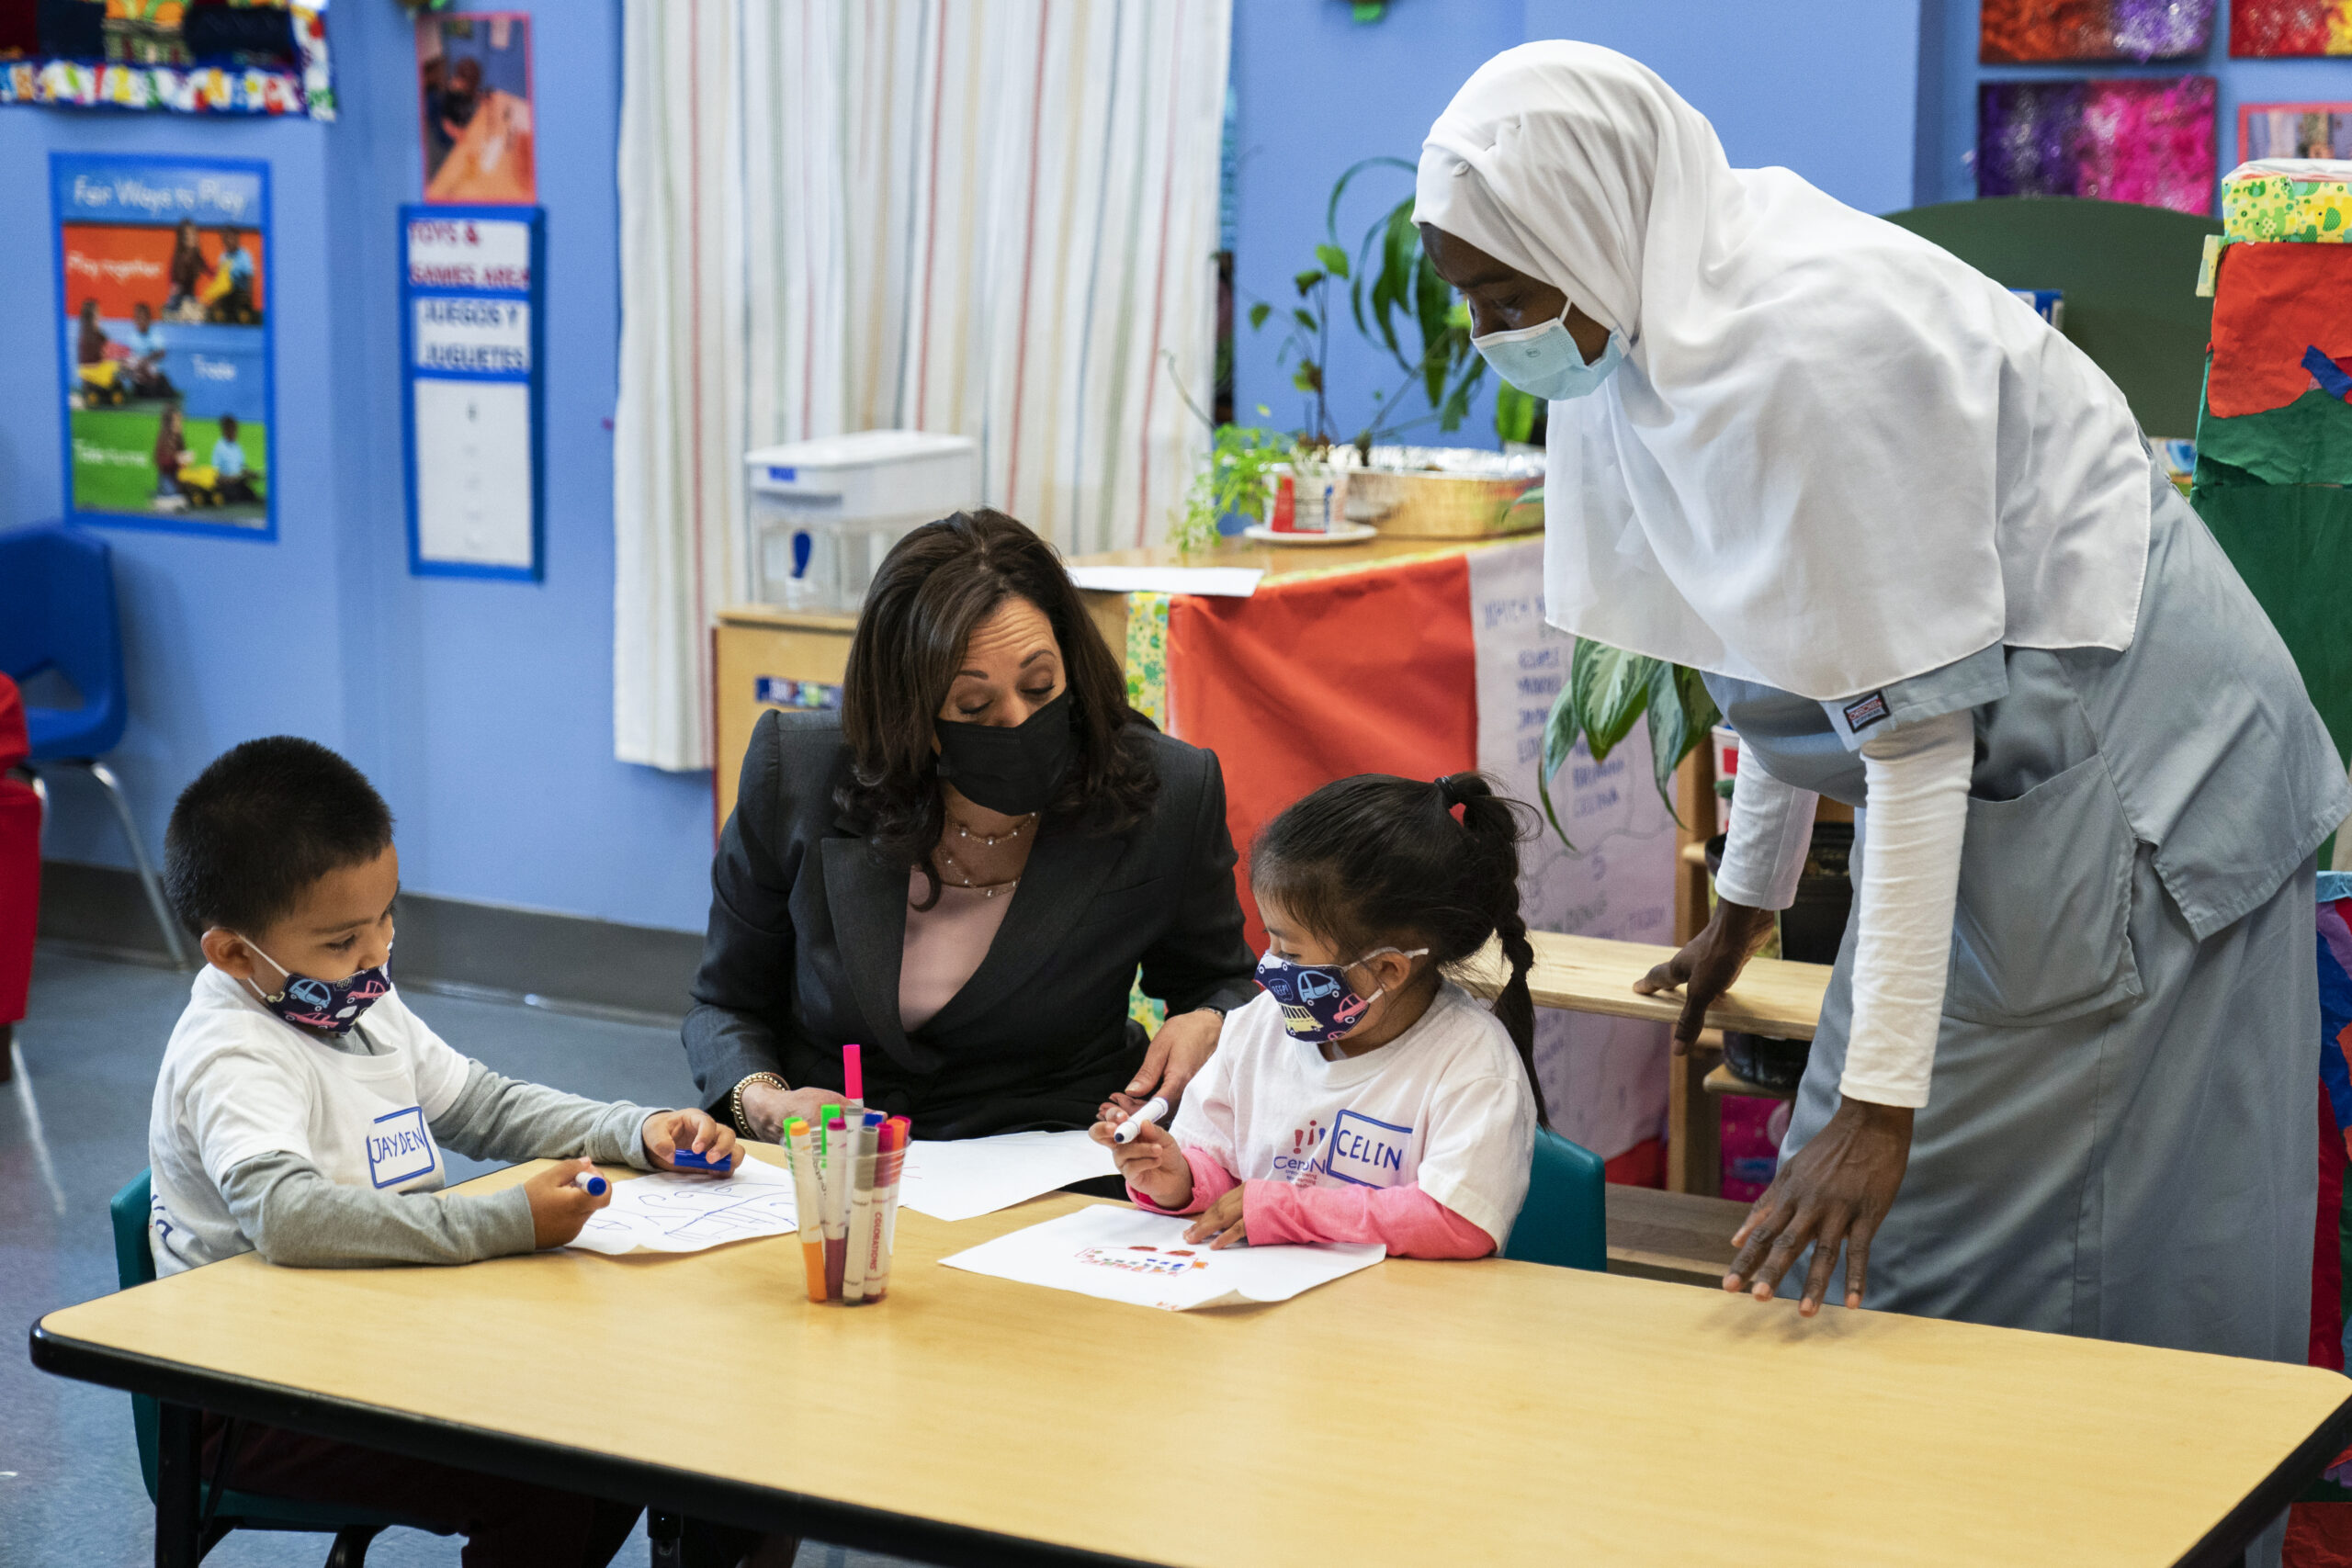 FILE - In this June 11, 2021, file photo, Vice President Kamala Harris talks with bilingual early childhood education school CentroNia students Jayden Bello, left, and Celina Barrera during a visit to the school in northwest Washington. Teacher Billo Diawara, right, watches. (AP Photo/Manuel Balce Ceneta, File)